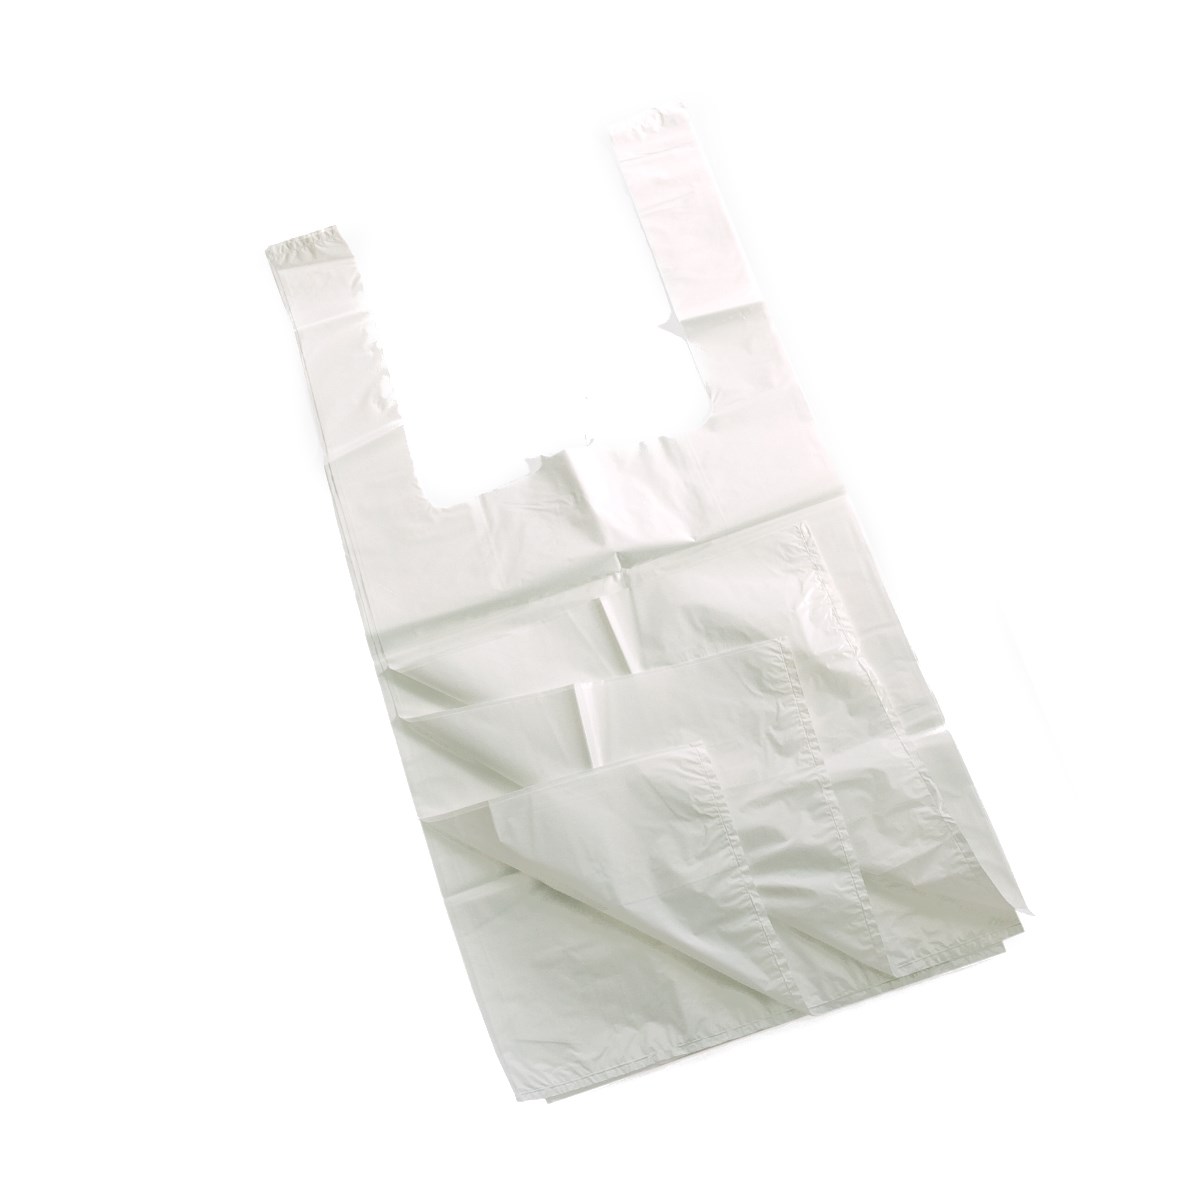 11 X 17 X 21 Inch White Plastic Carrier Bags 13 Micron